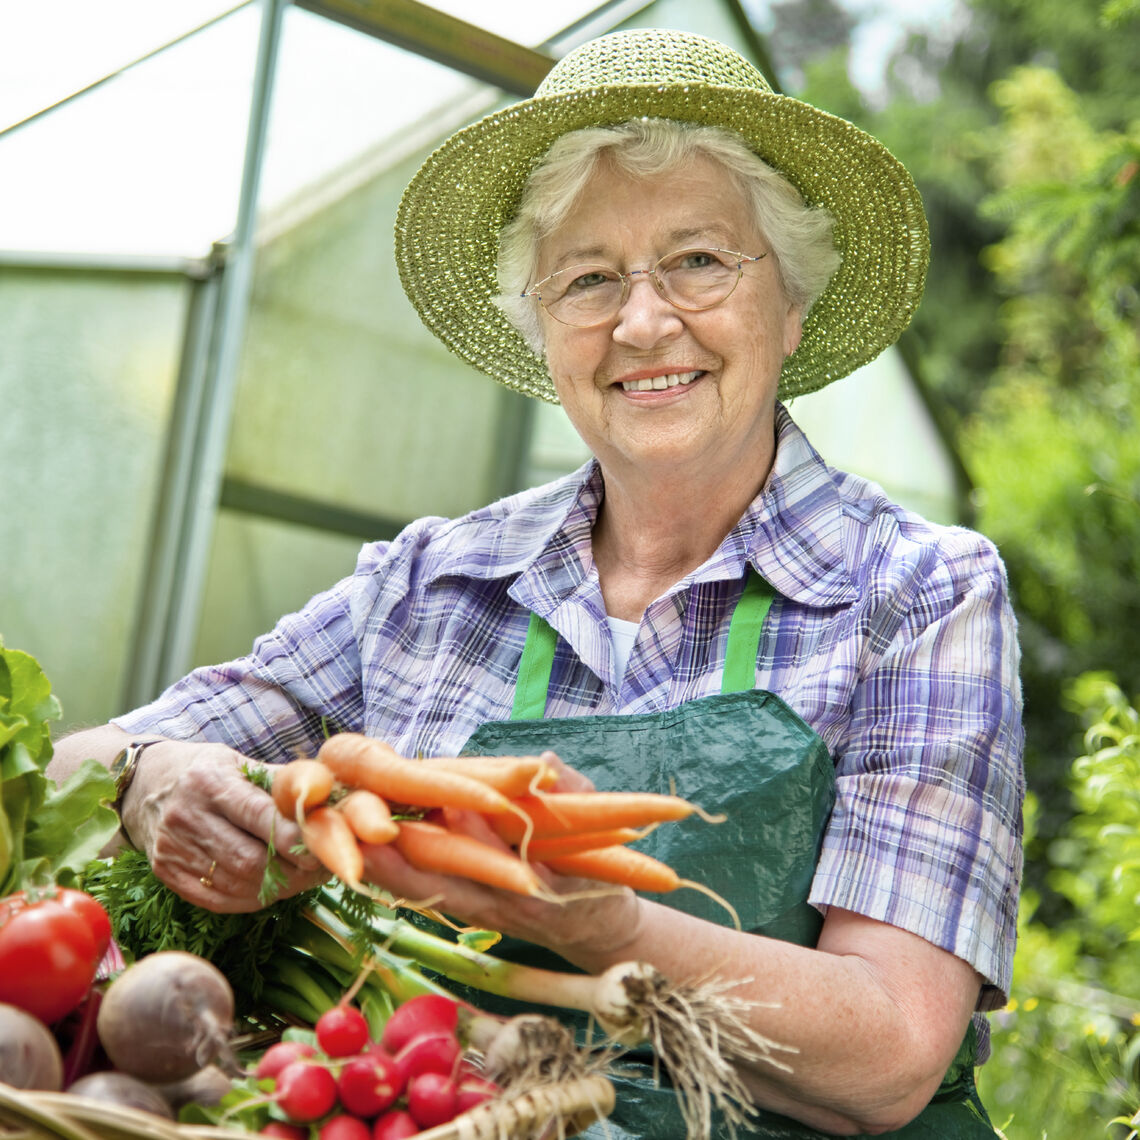 older woman holding fruits and vegetables in a basket